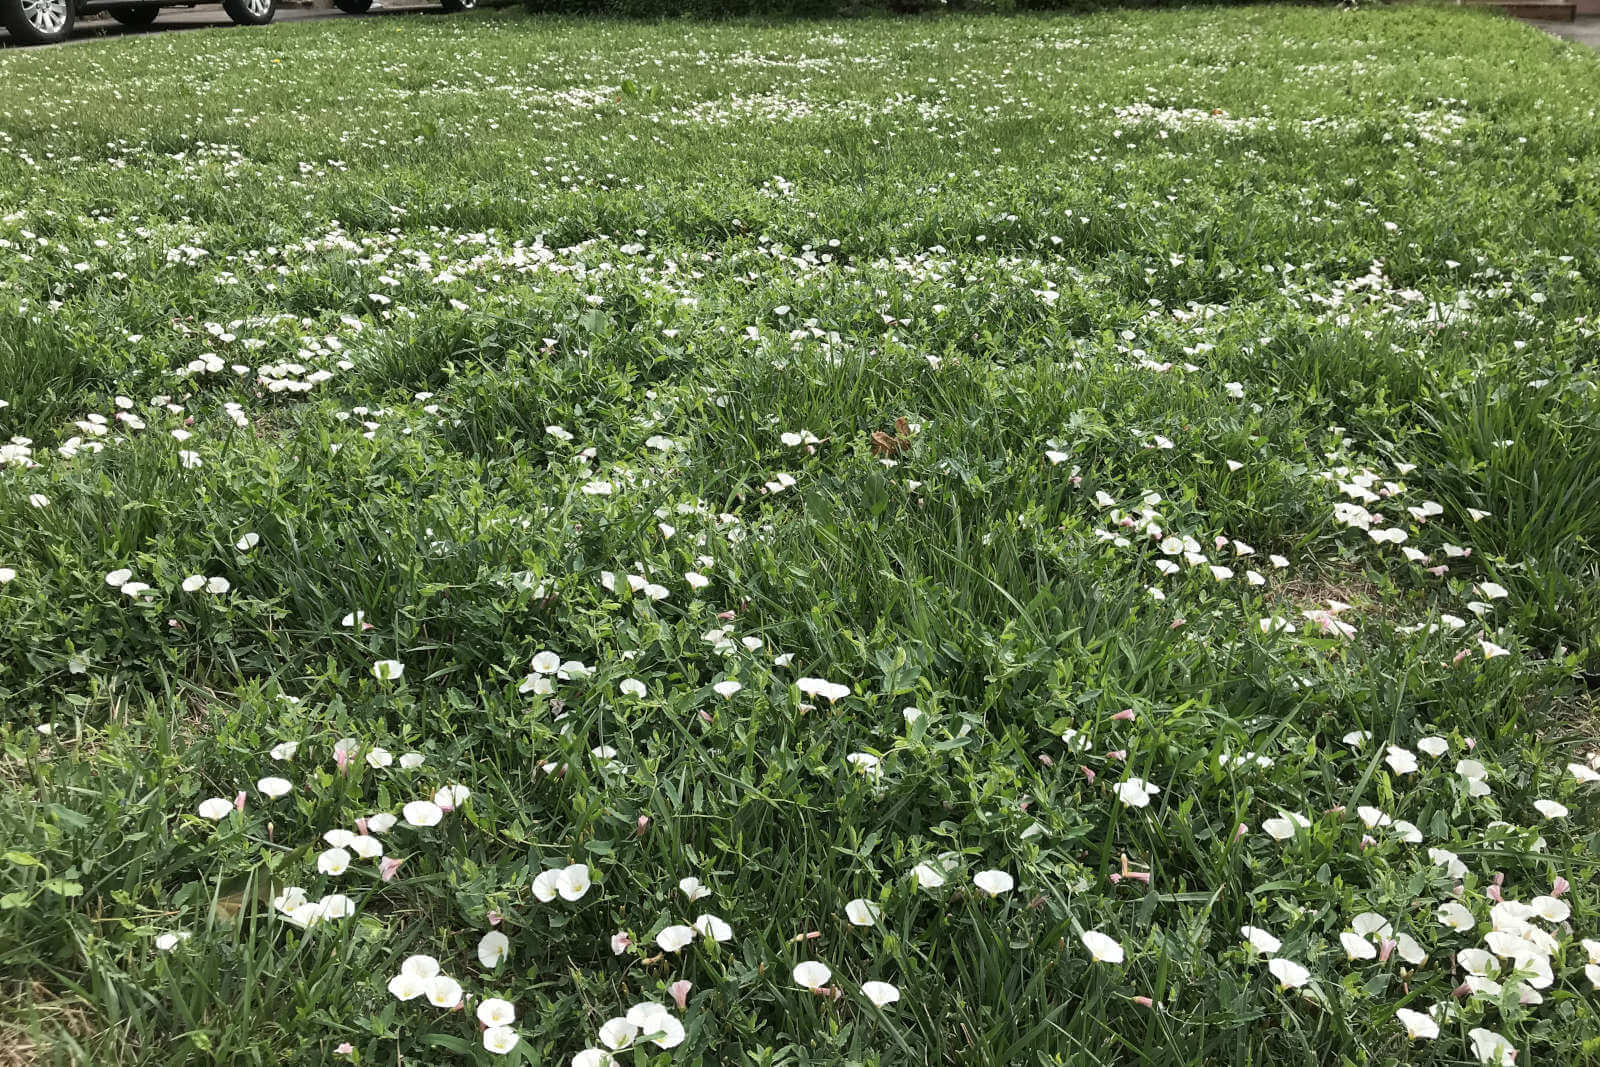 Weeds on a large lawn.